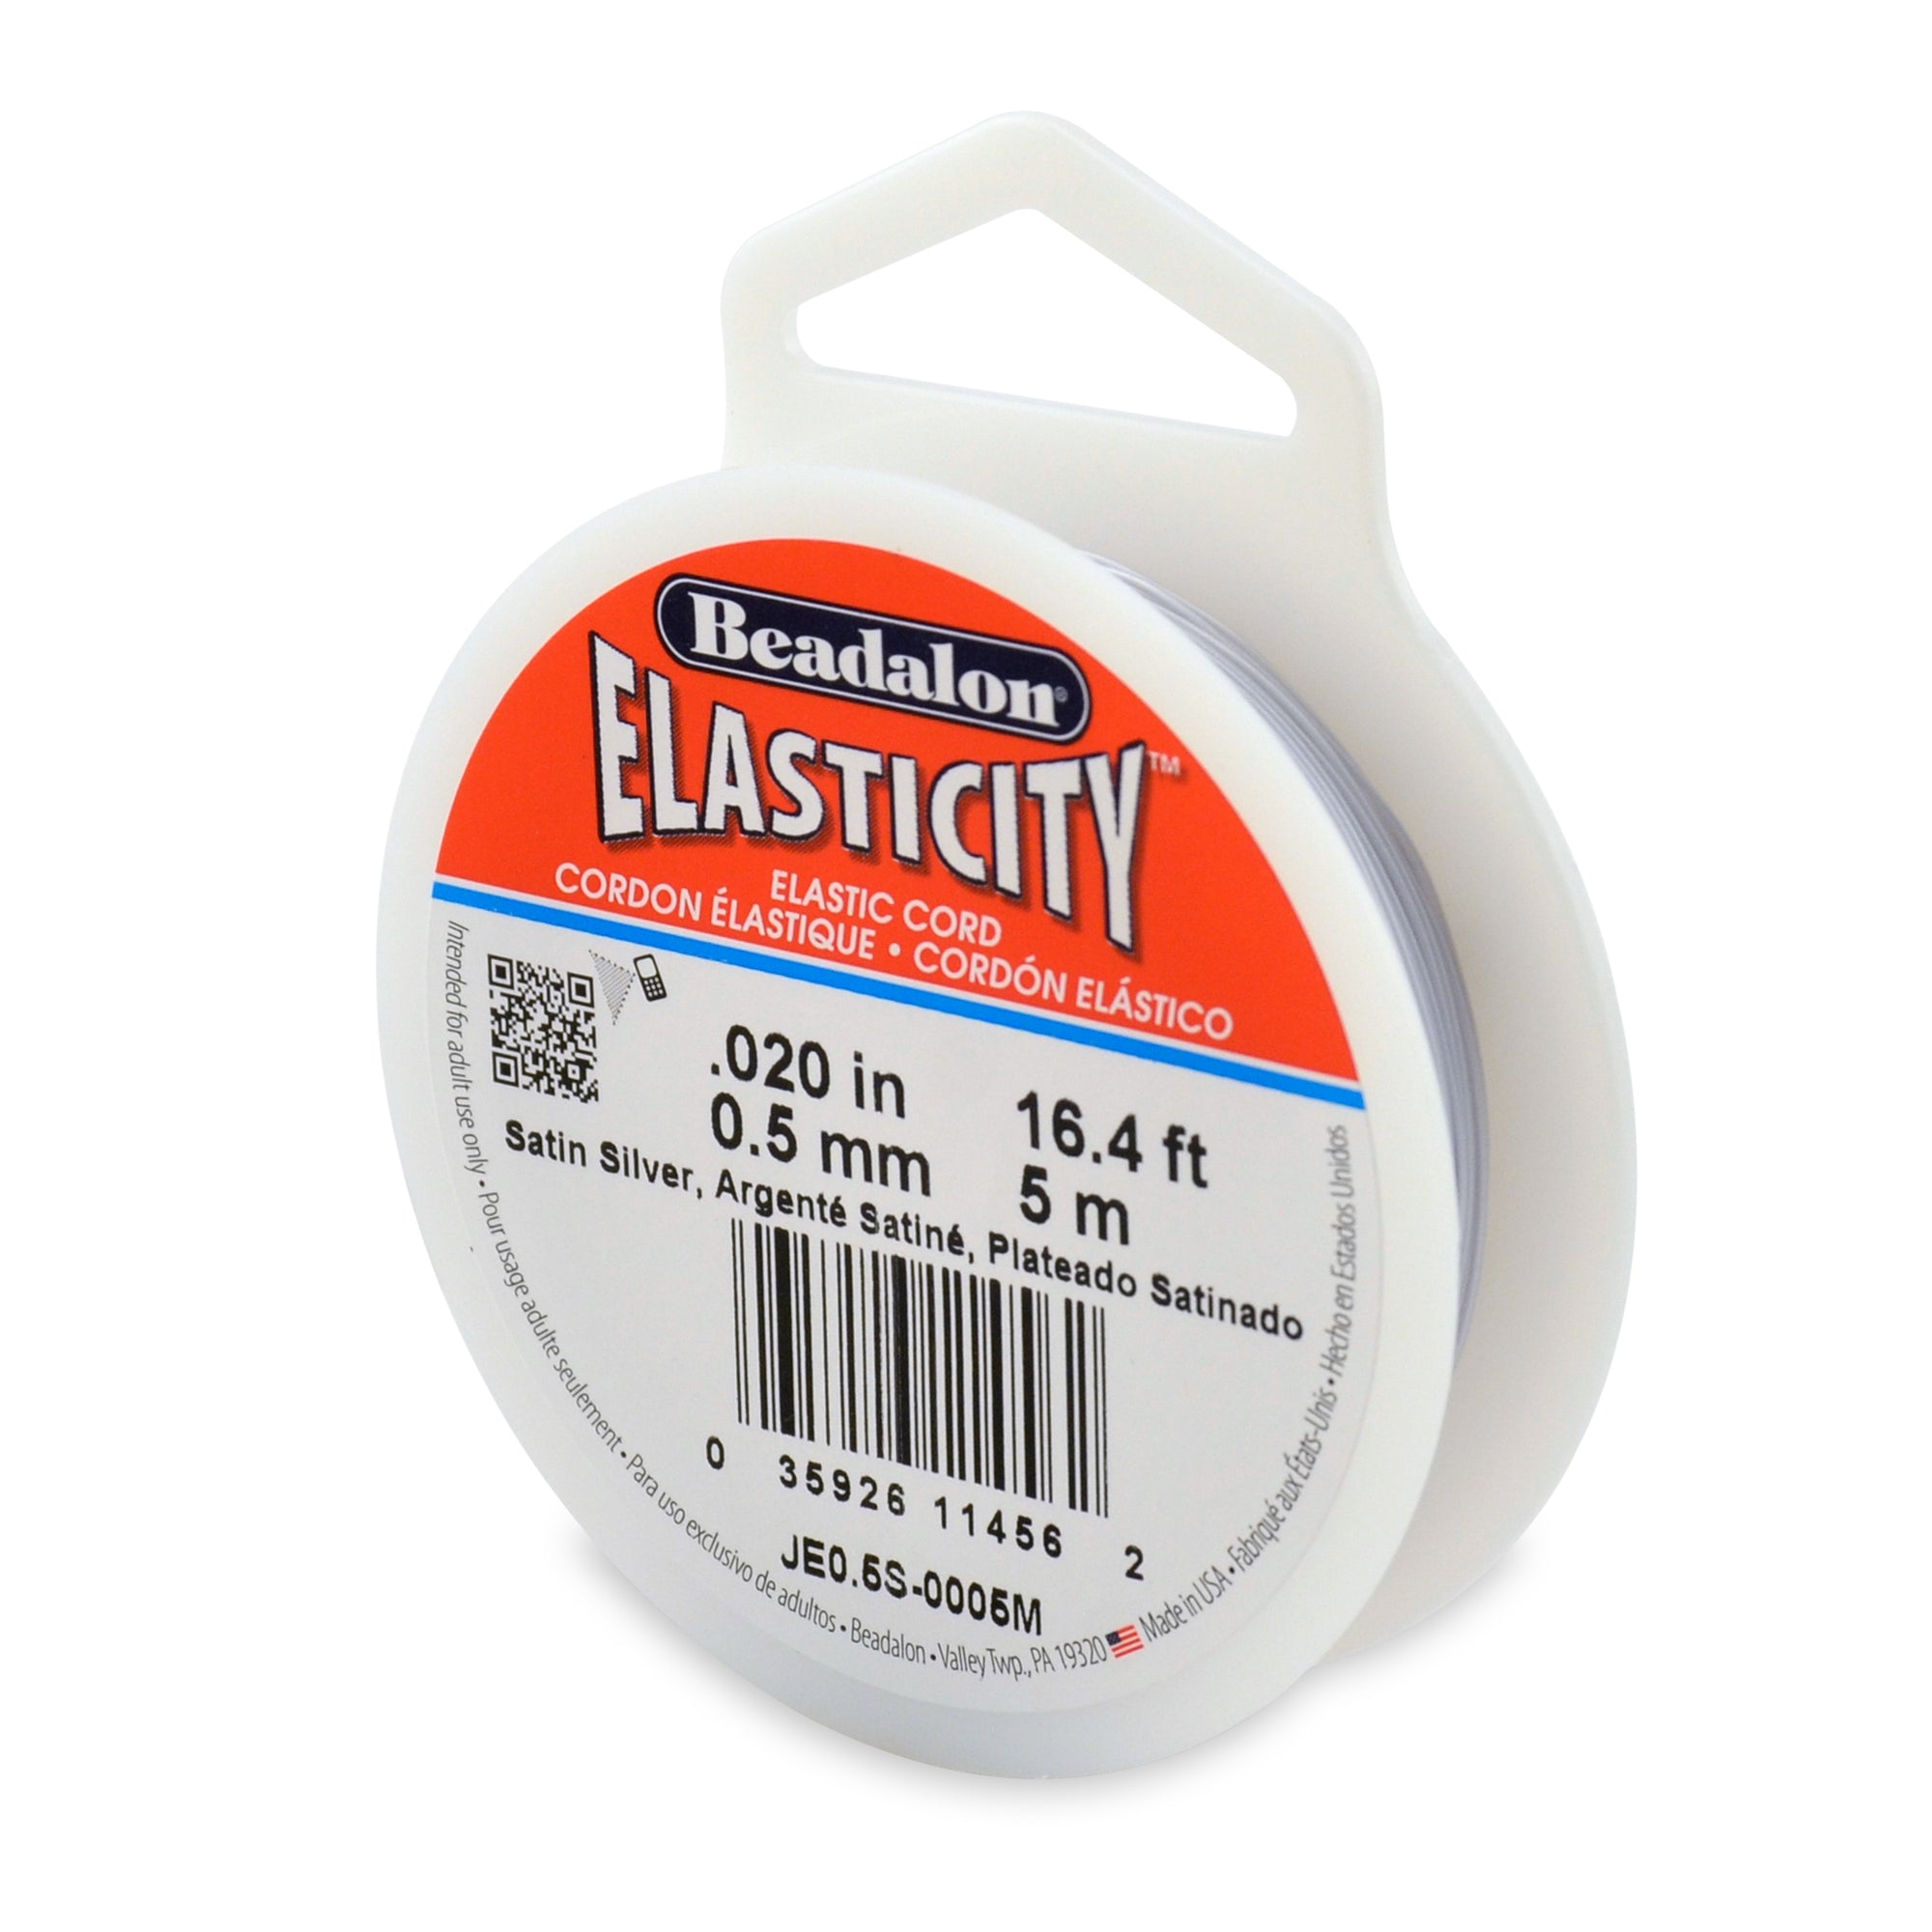 Elasticity Stretch Cord, 0.5 mm / .020 in, Satin Silver, 5 meter